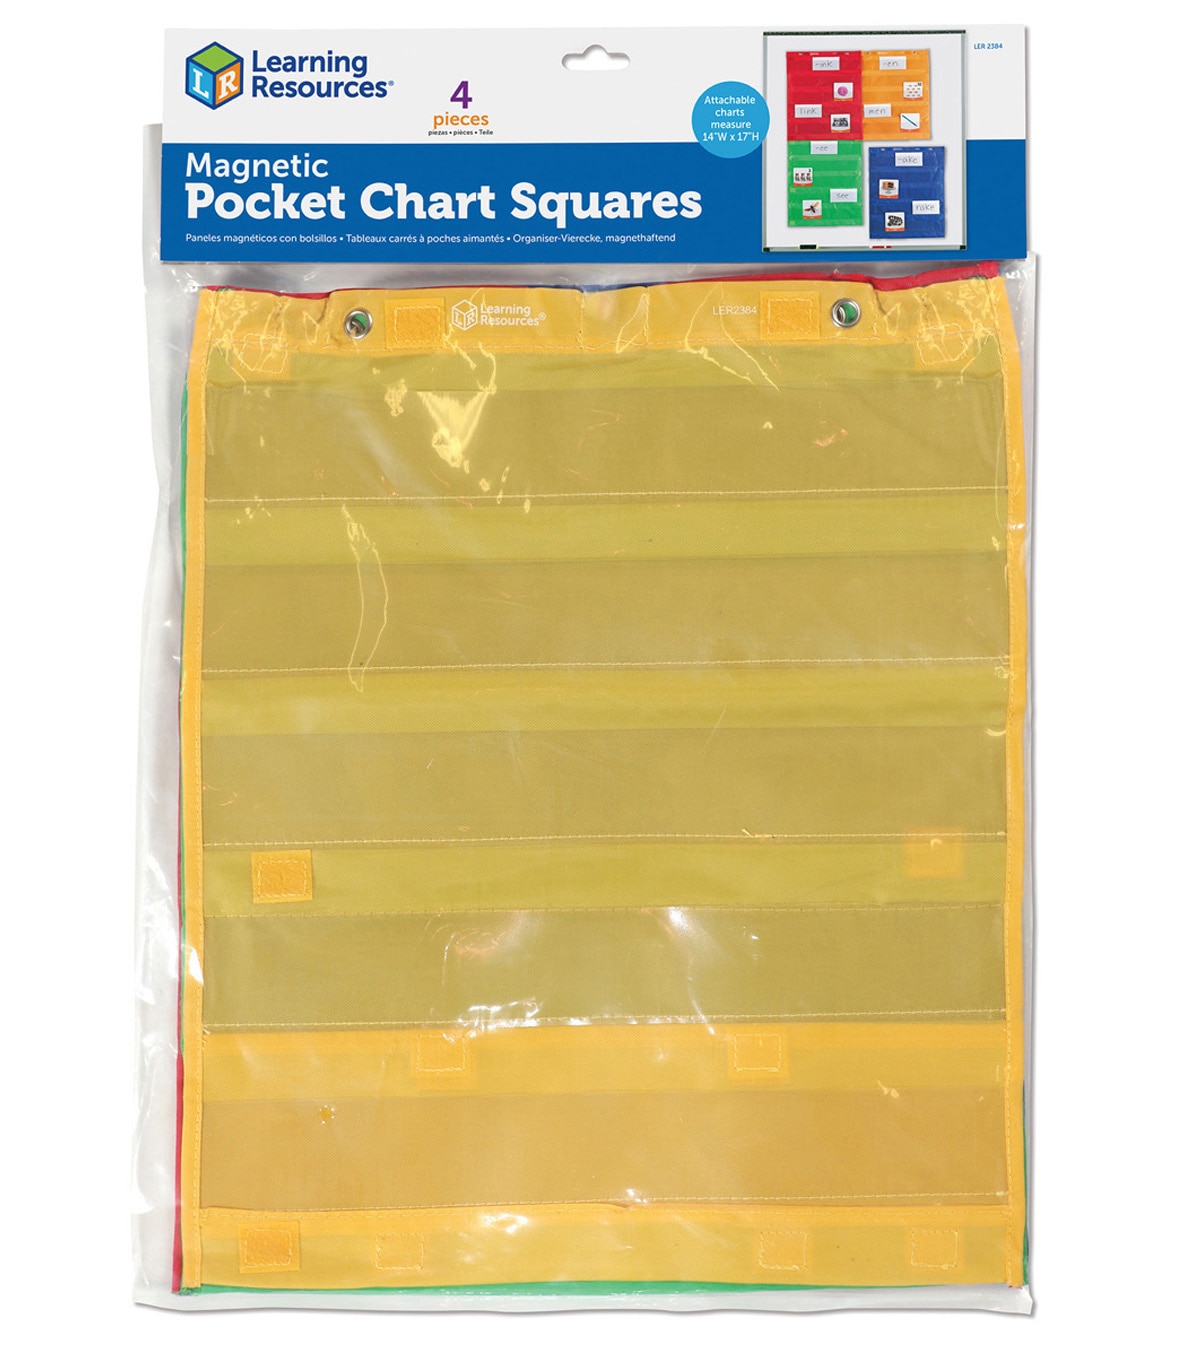 Learning Resources Pocket Chart